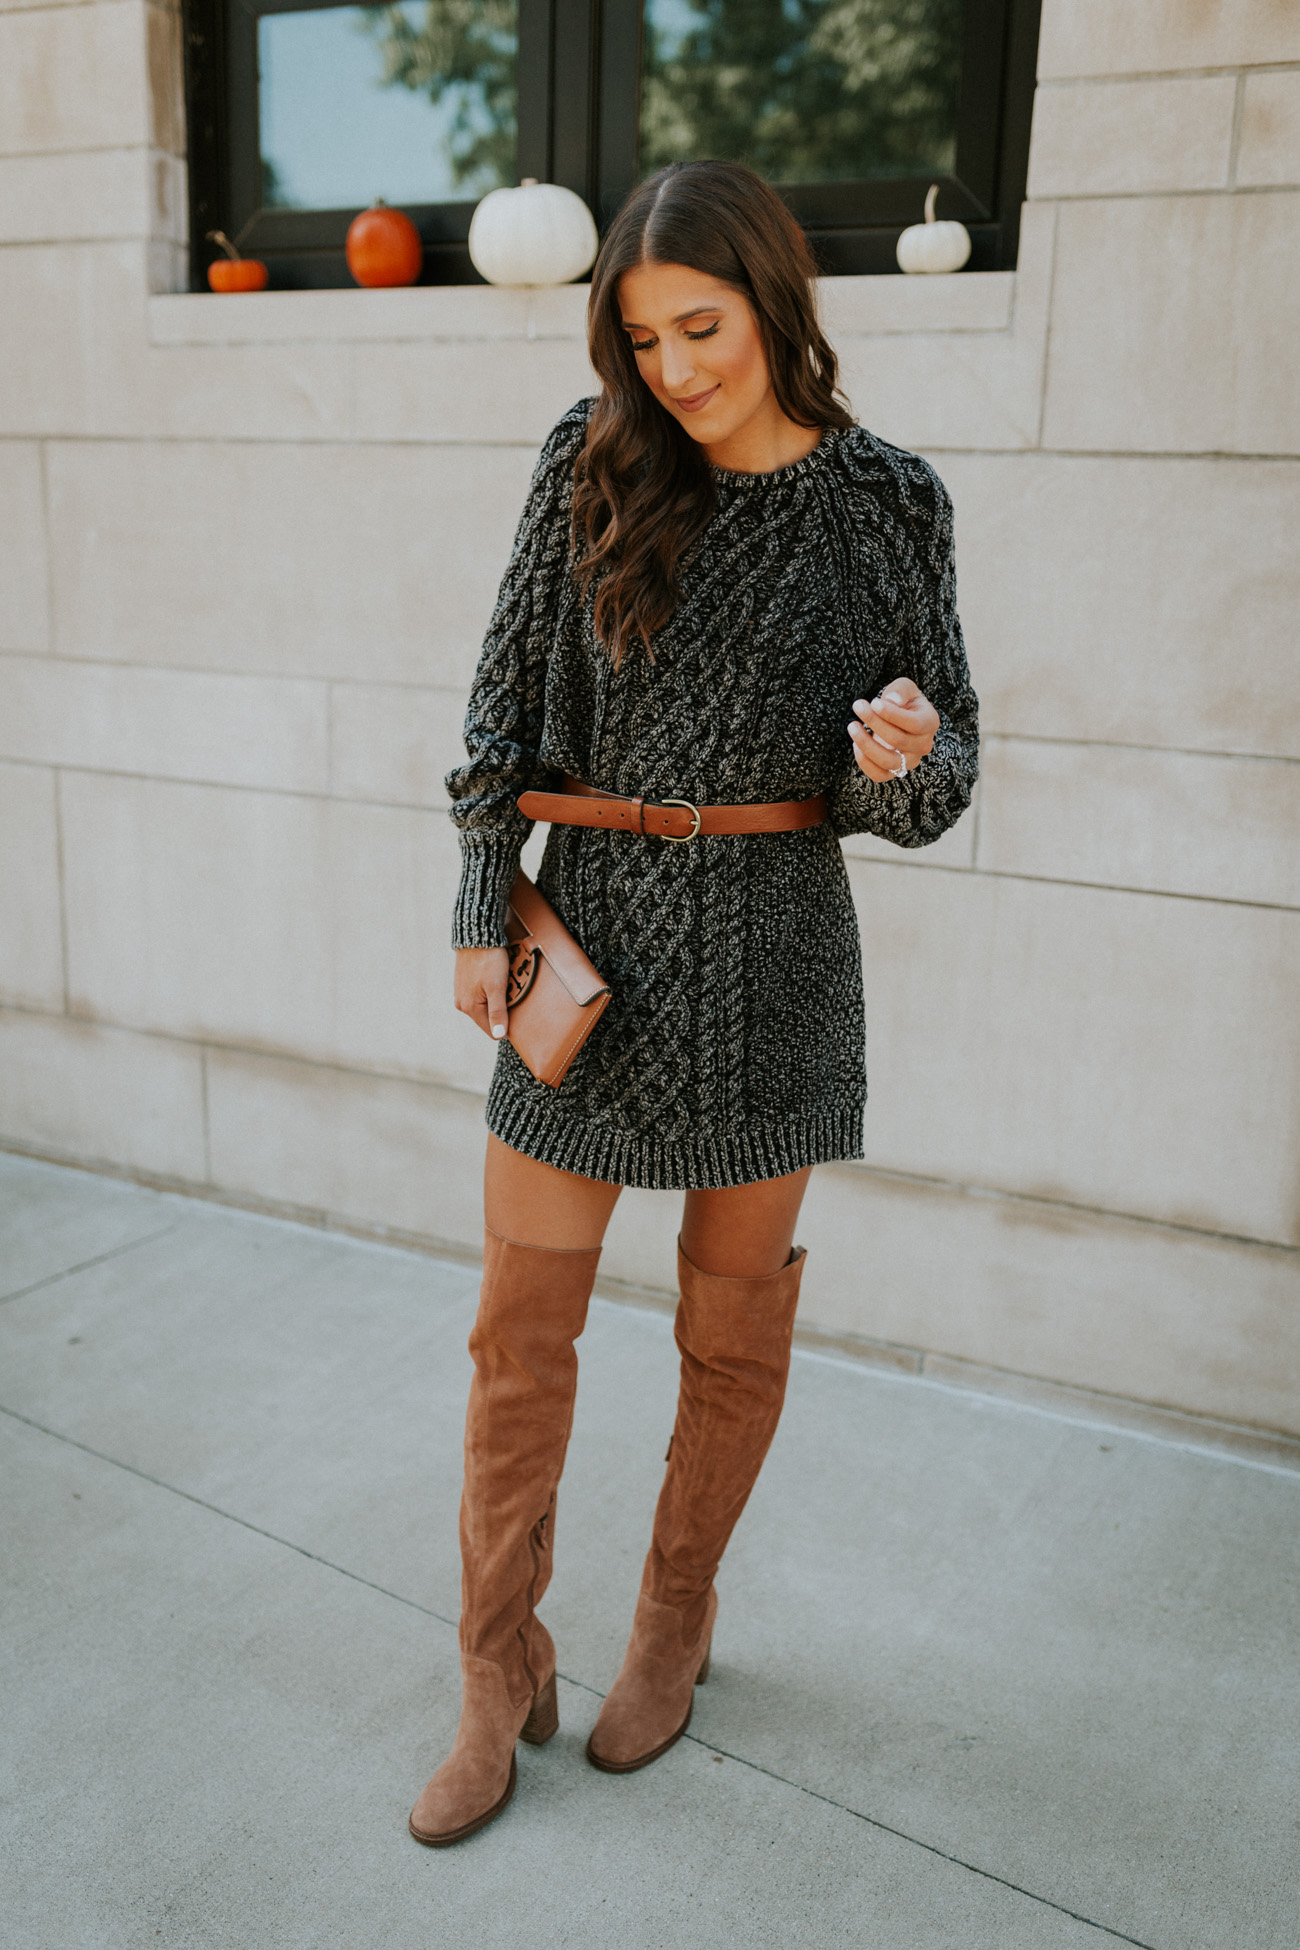 cable knit sweater dress, free people dress, sweater dress, over the knee boots, over the knee suede boot, tory burch miller clutch, fall style, fall outfit, fall inspo, cozy fall outfit // grace white a southern drawl